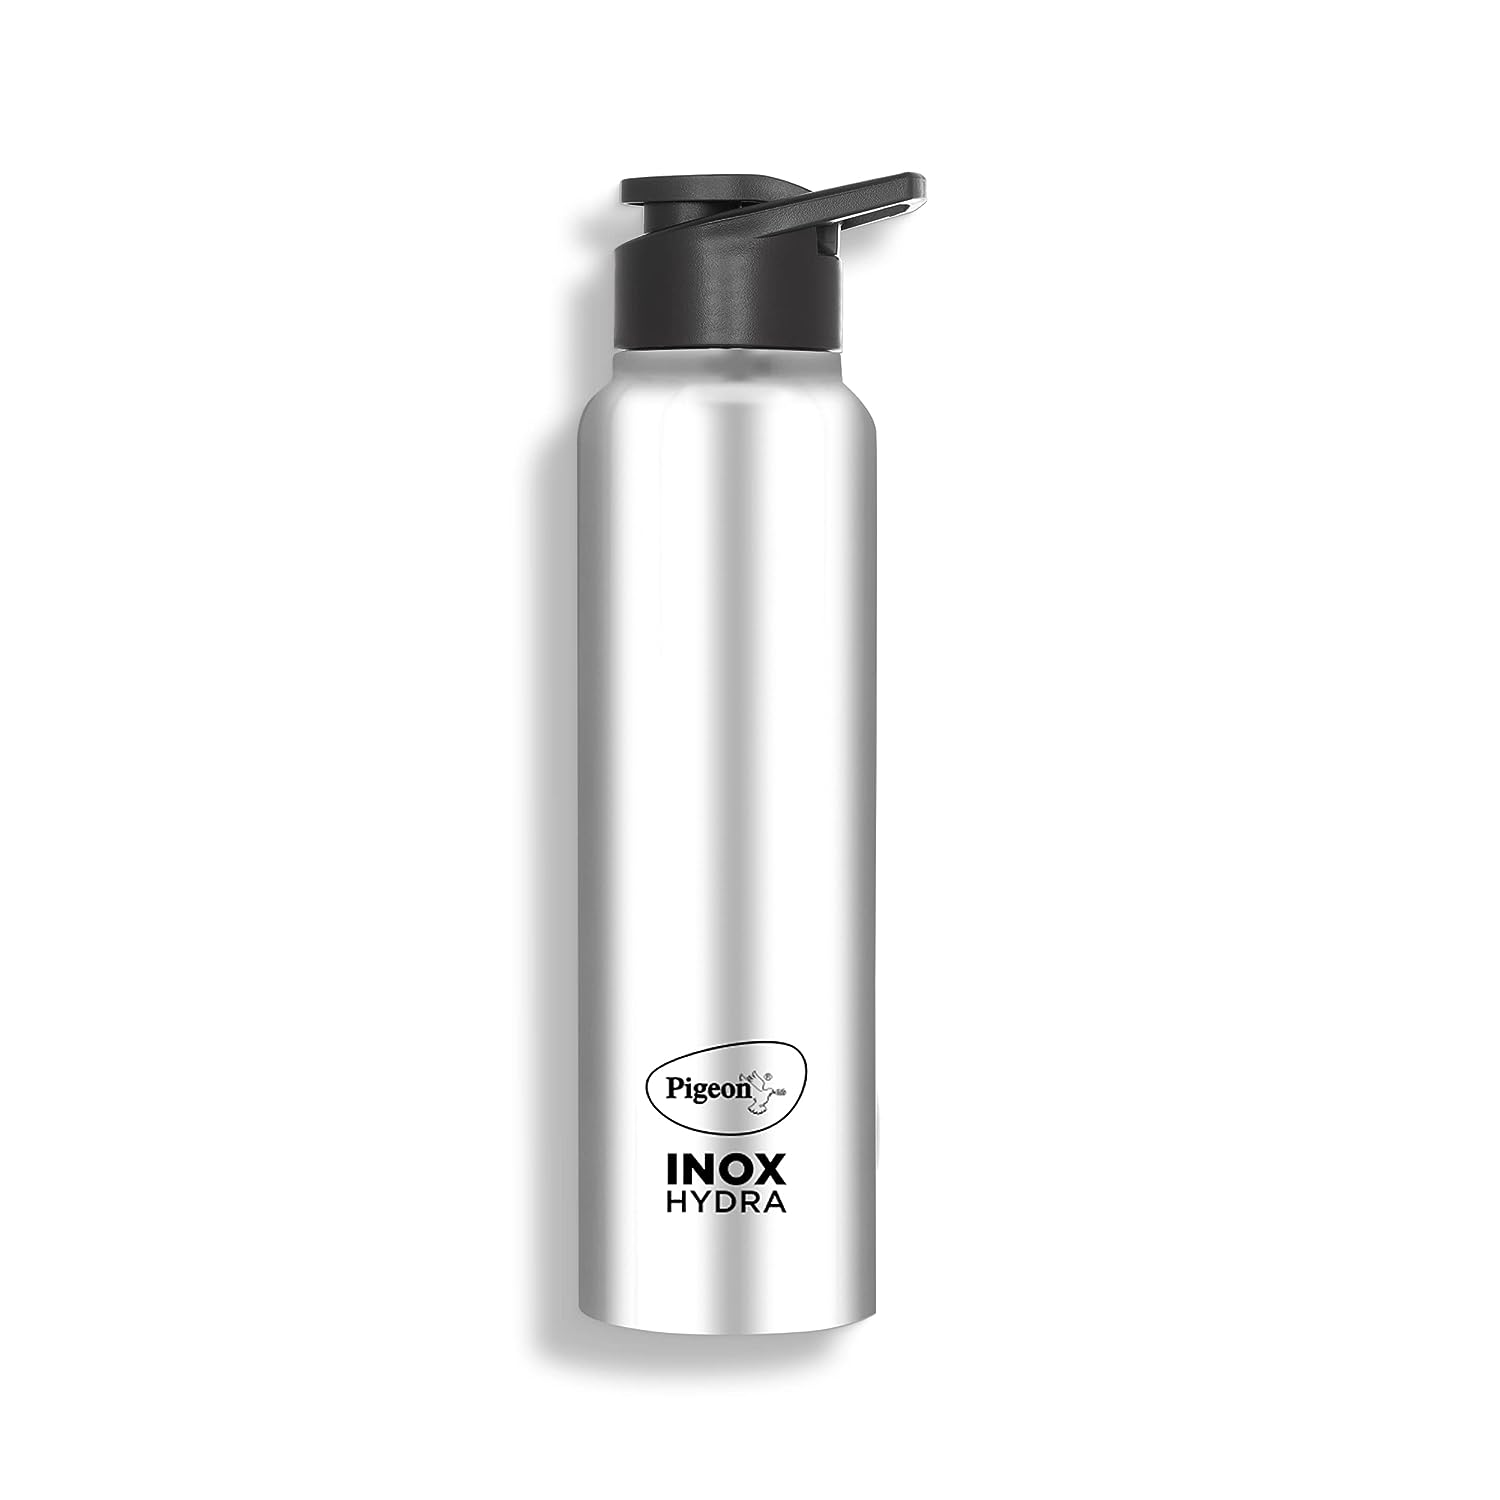 Stainless Steel Hot & Cold Water Bottle -800ml - BoldFit